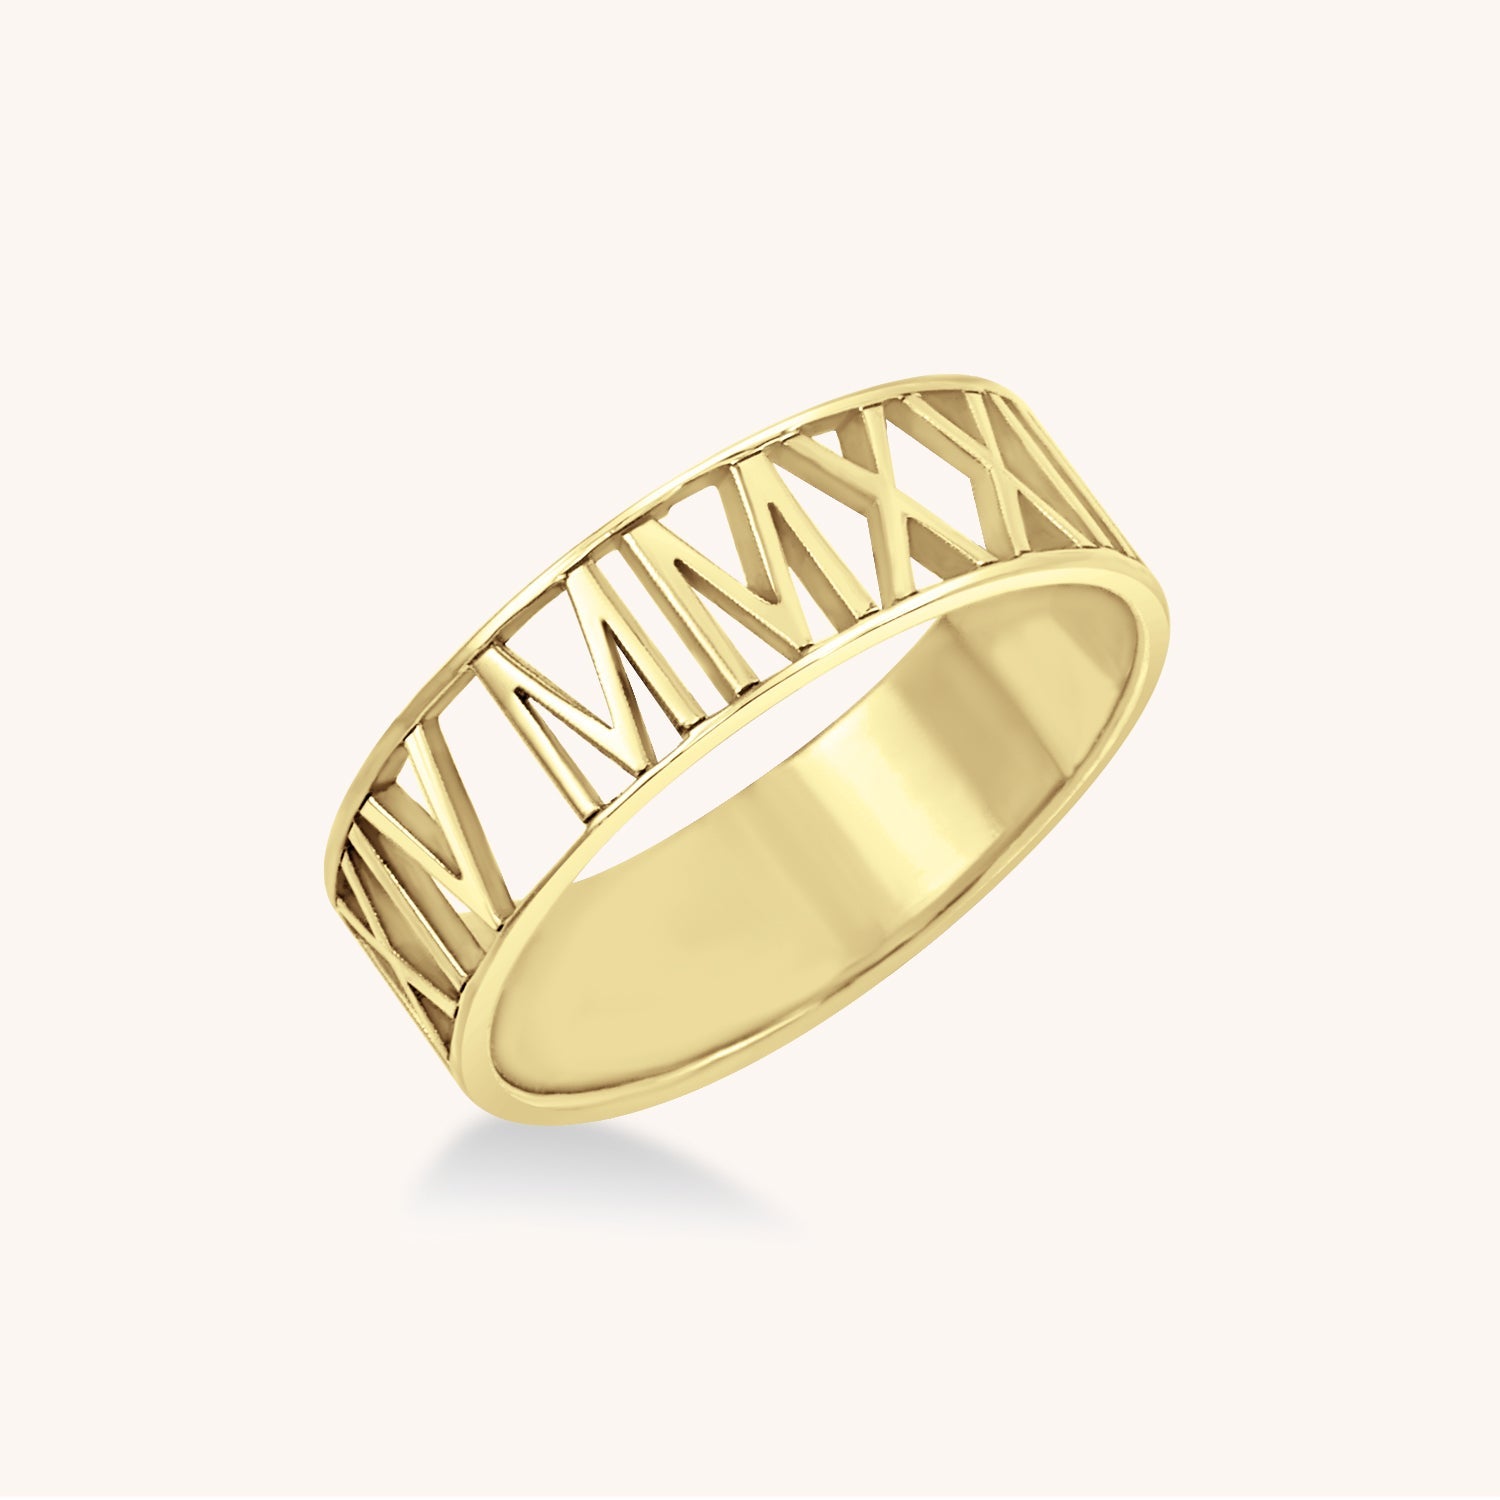 Enamel Round Roman Numeral Ring For Women Girl Couple Stainless Steel 8mm  Shells Finger Rings Popularity Gold Color Jewelry New - AliExpress